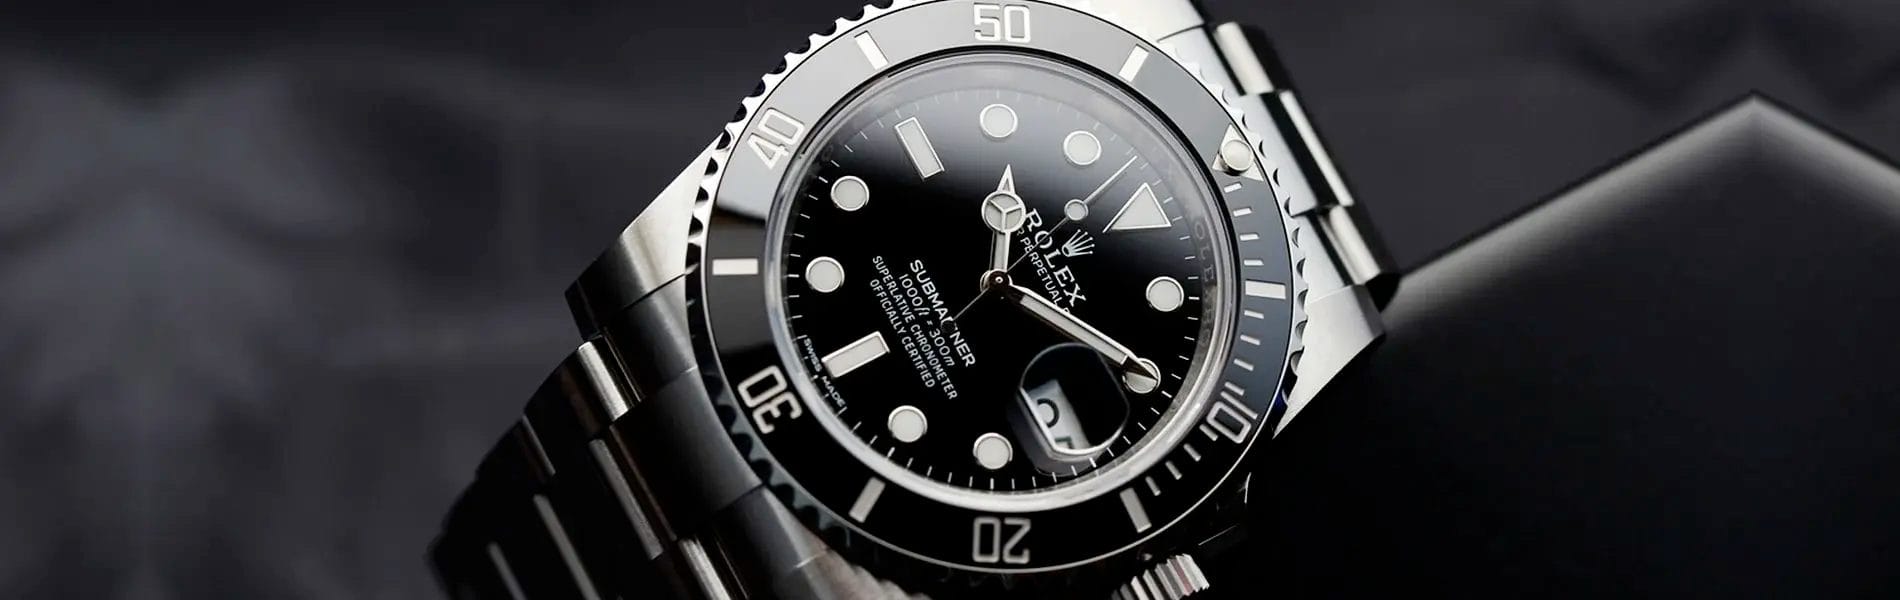 rolex submariner black dial replica watch on the black backround